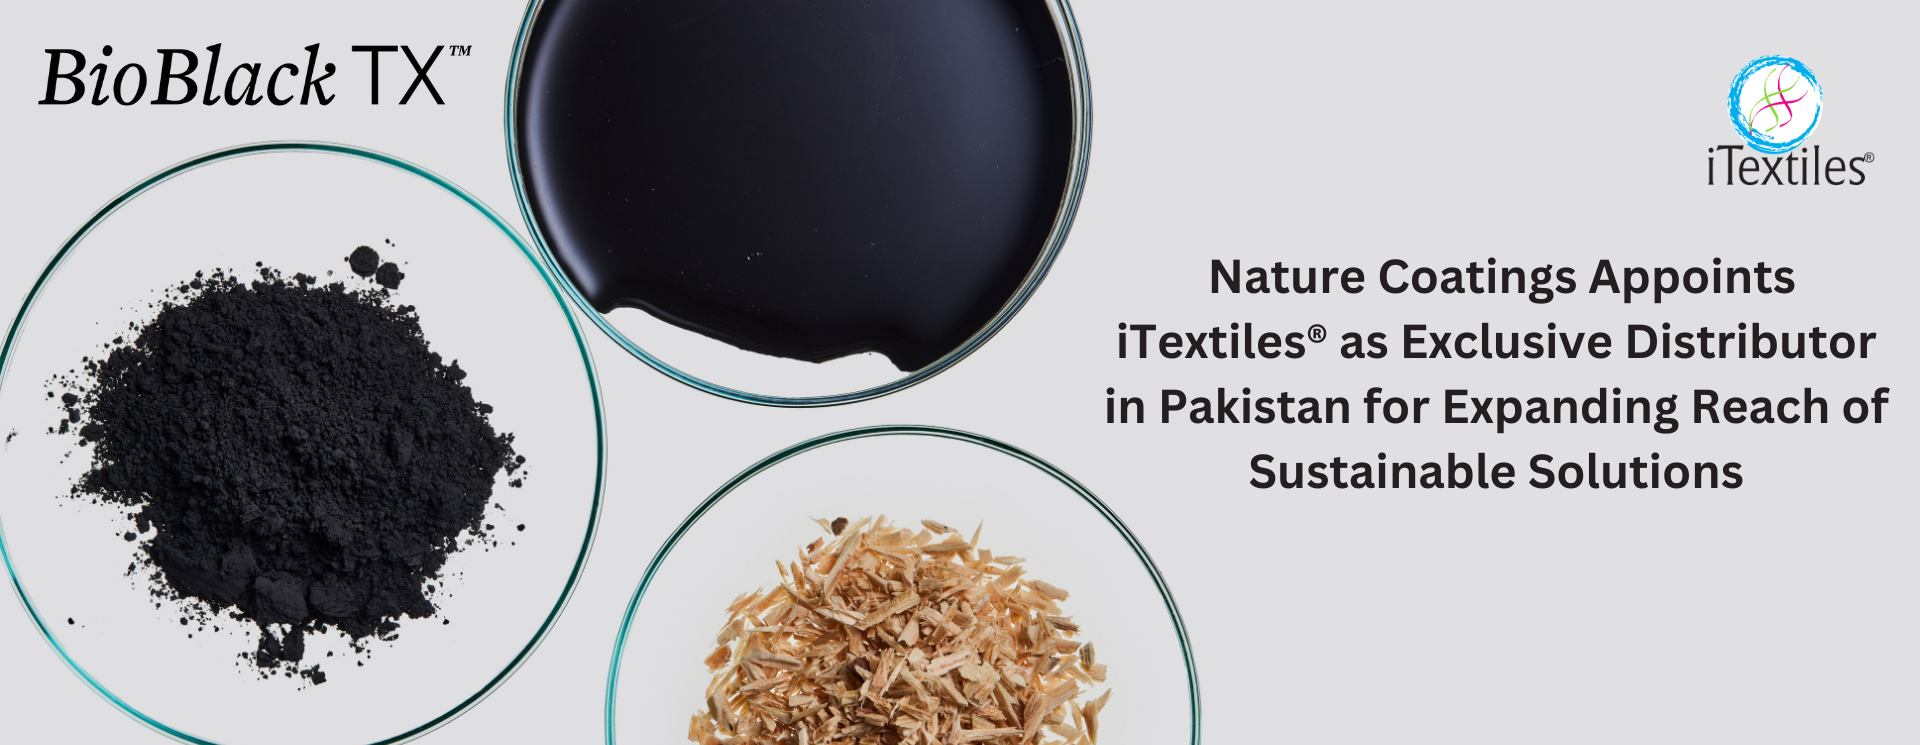  Nature Coatings Appoints iTextiles as Exclusive Distributor in Pakistan: Expanding Reach of Sustainable Solutions